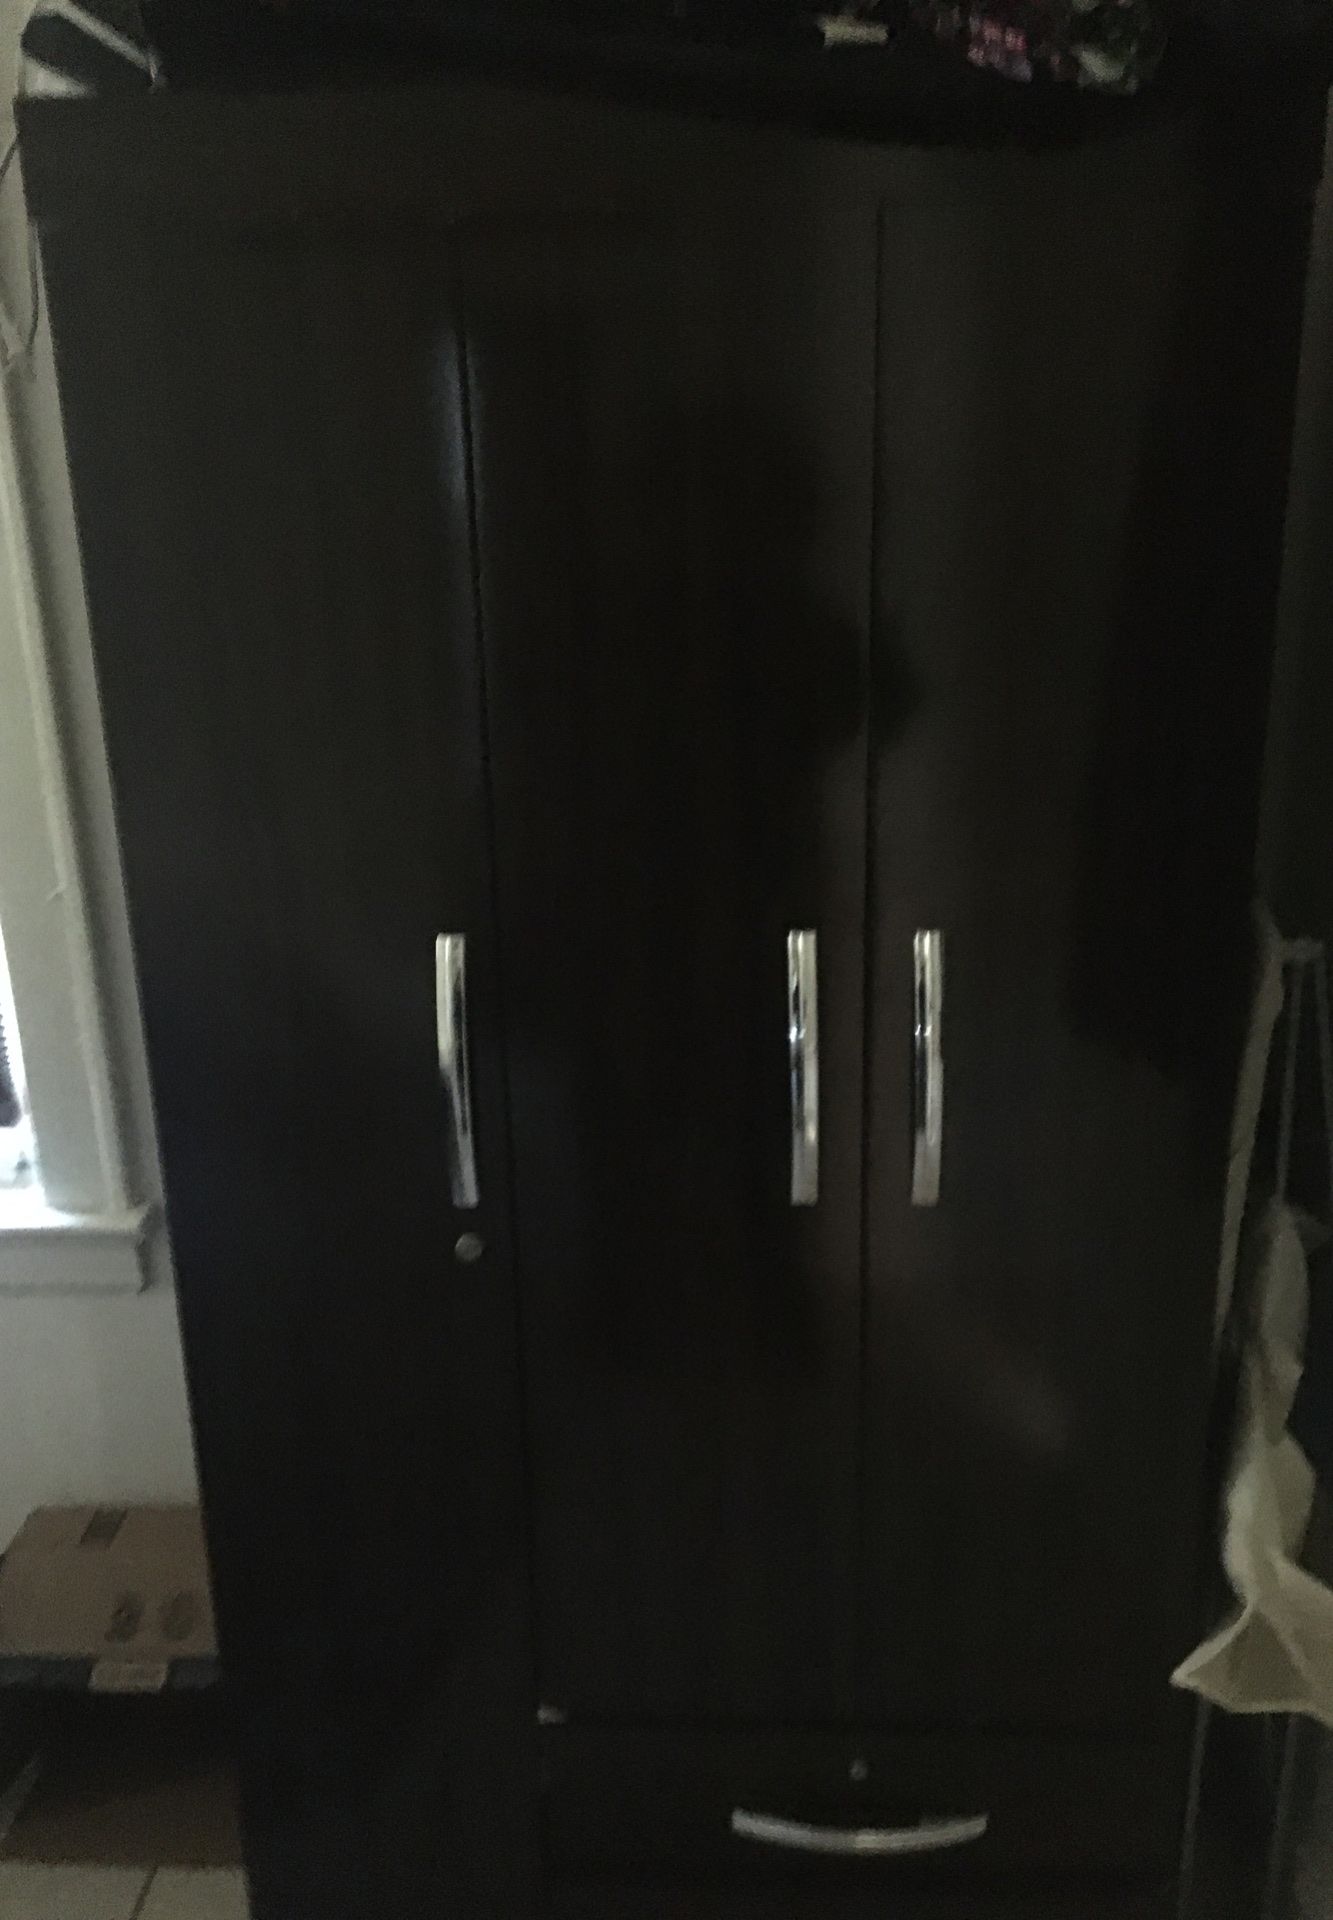 Medium closet with brown lacquer